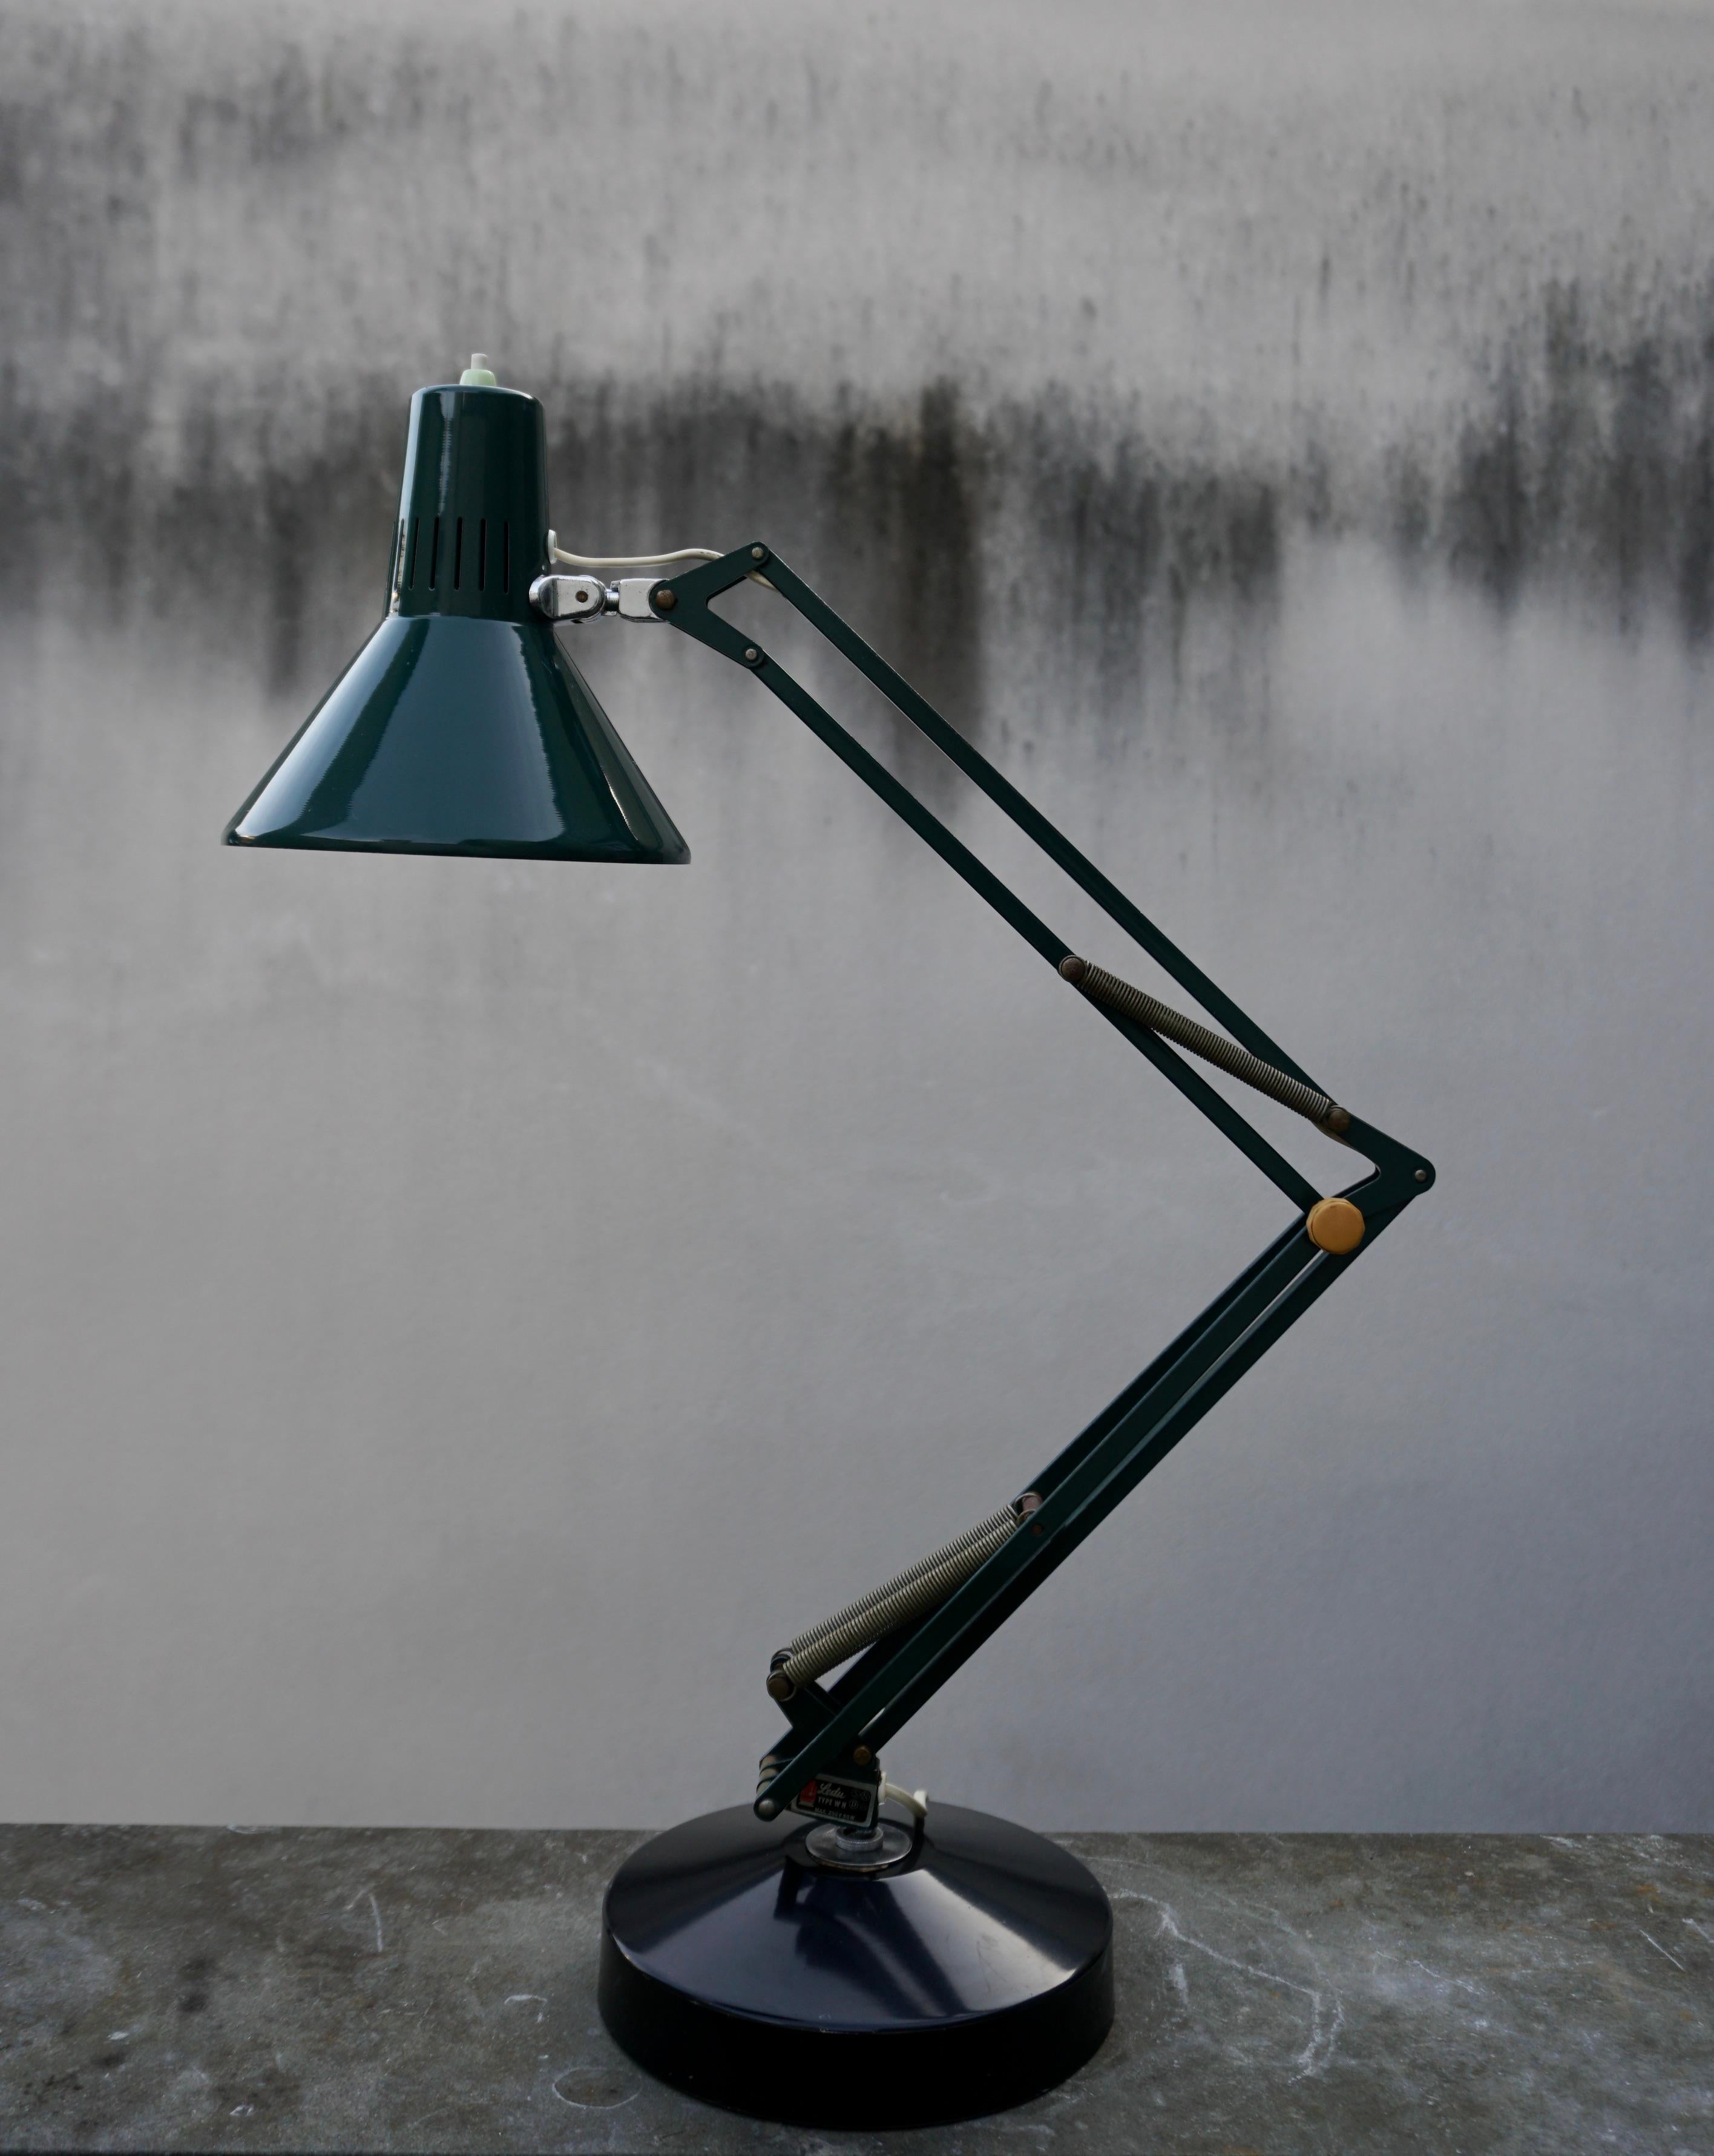 Industrial office desk lamp by Ledu, 1970s, Made in Sweden

Big adjustable articulated desk lamp by Ledu, made in Sweden in the 1970se. Nice patina. 
Maximum height is 80 cm.
Diameter 20 cm.